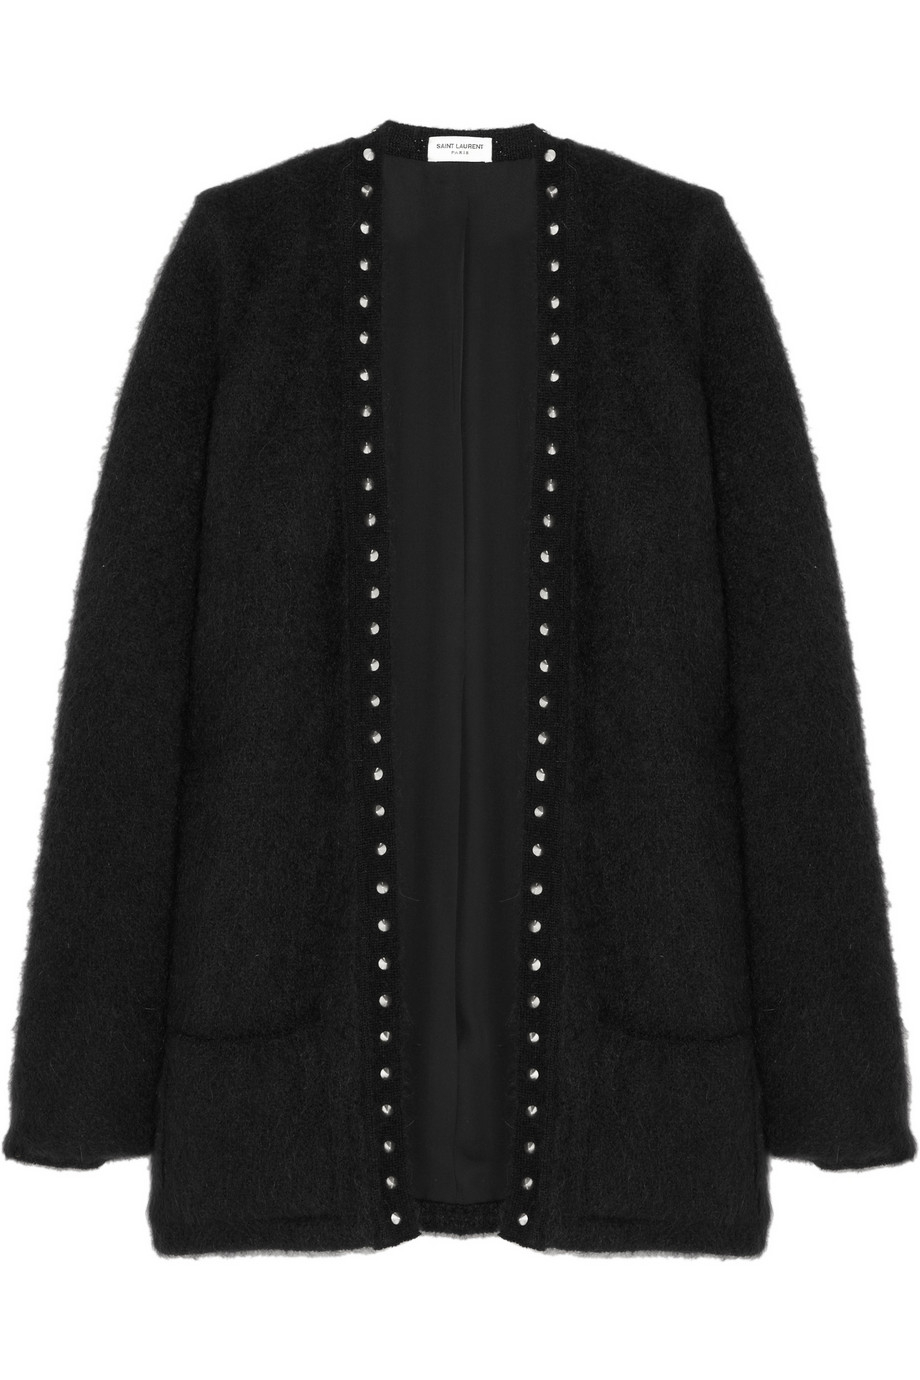 Lyst - Saint Laurent Studded Mohairblend Cardigan in Black